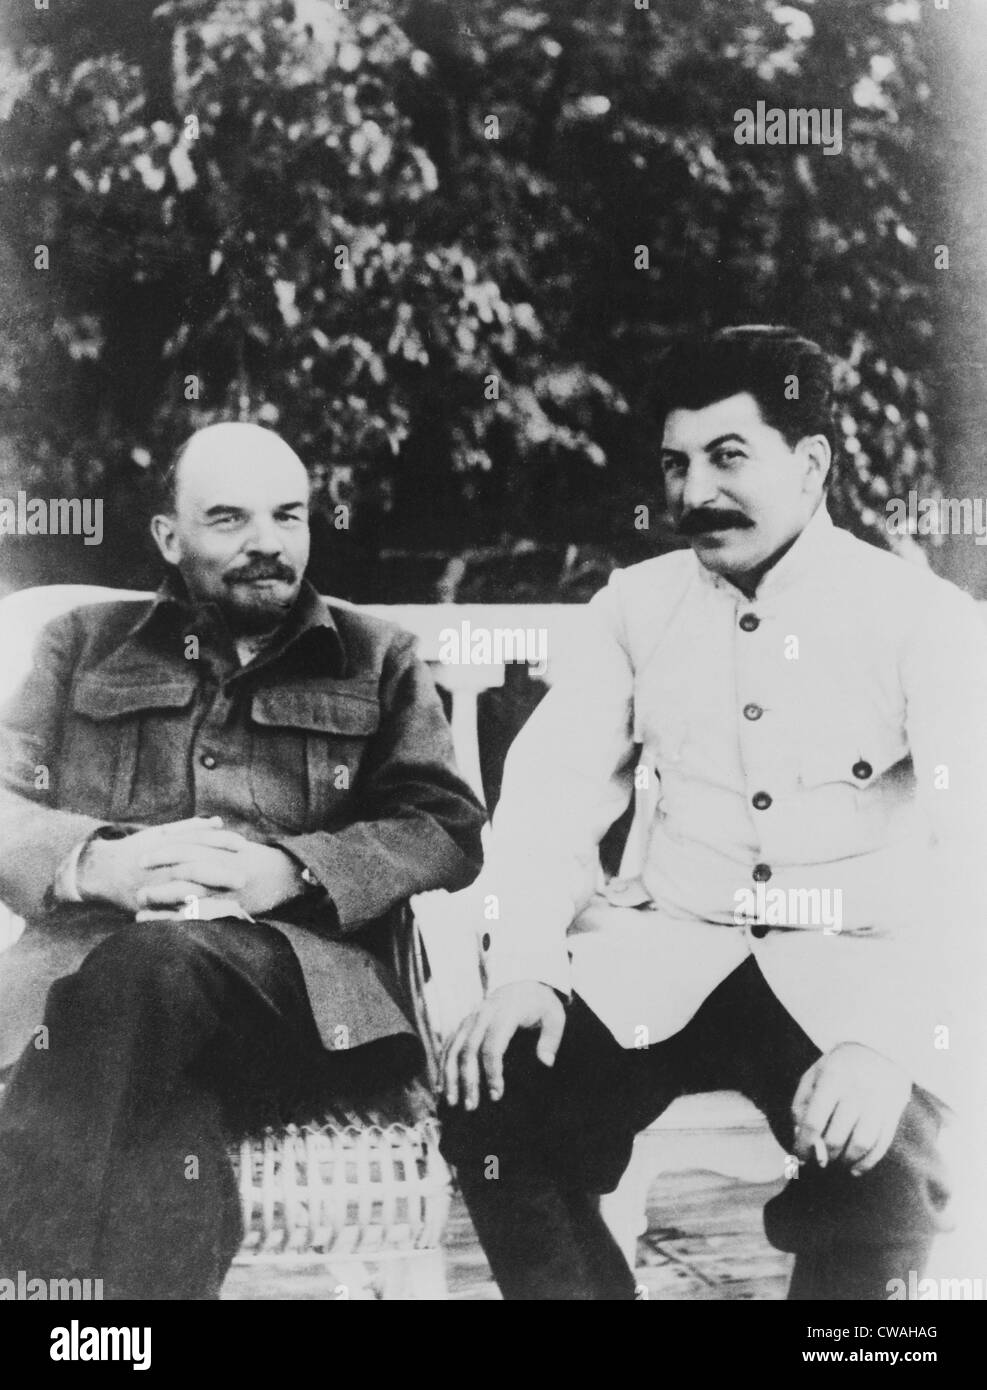 Joseph Stalin (1879-1953) and Vladimir Ilyich Lenin (1870-1924). Lenin was succeeded by Stalin, who consolidated dictatorial Stock Photo